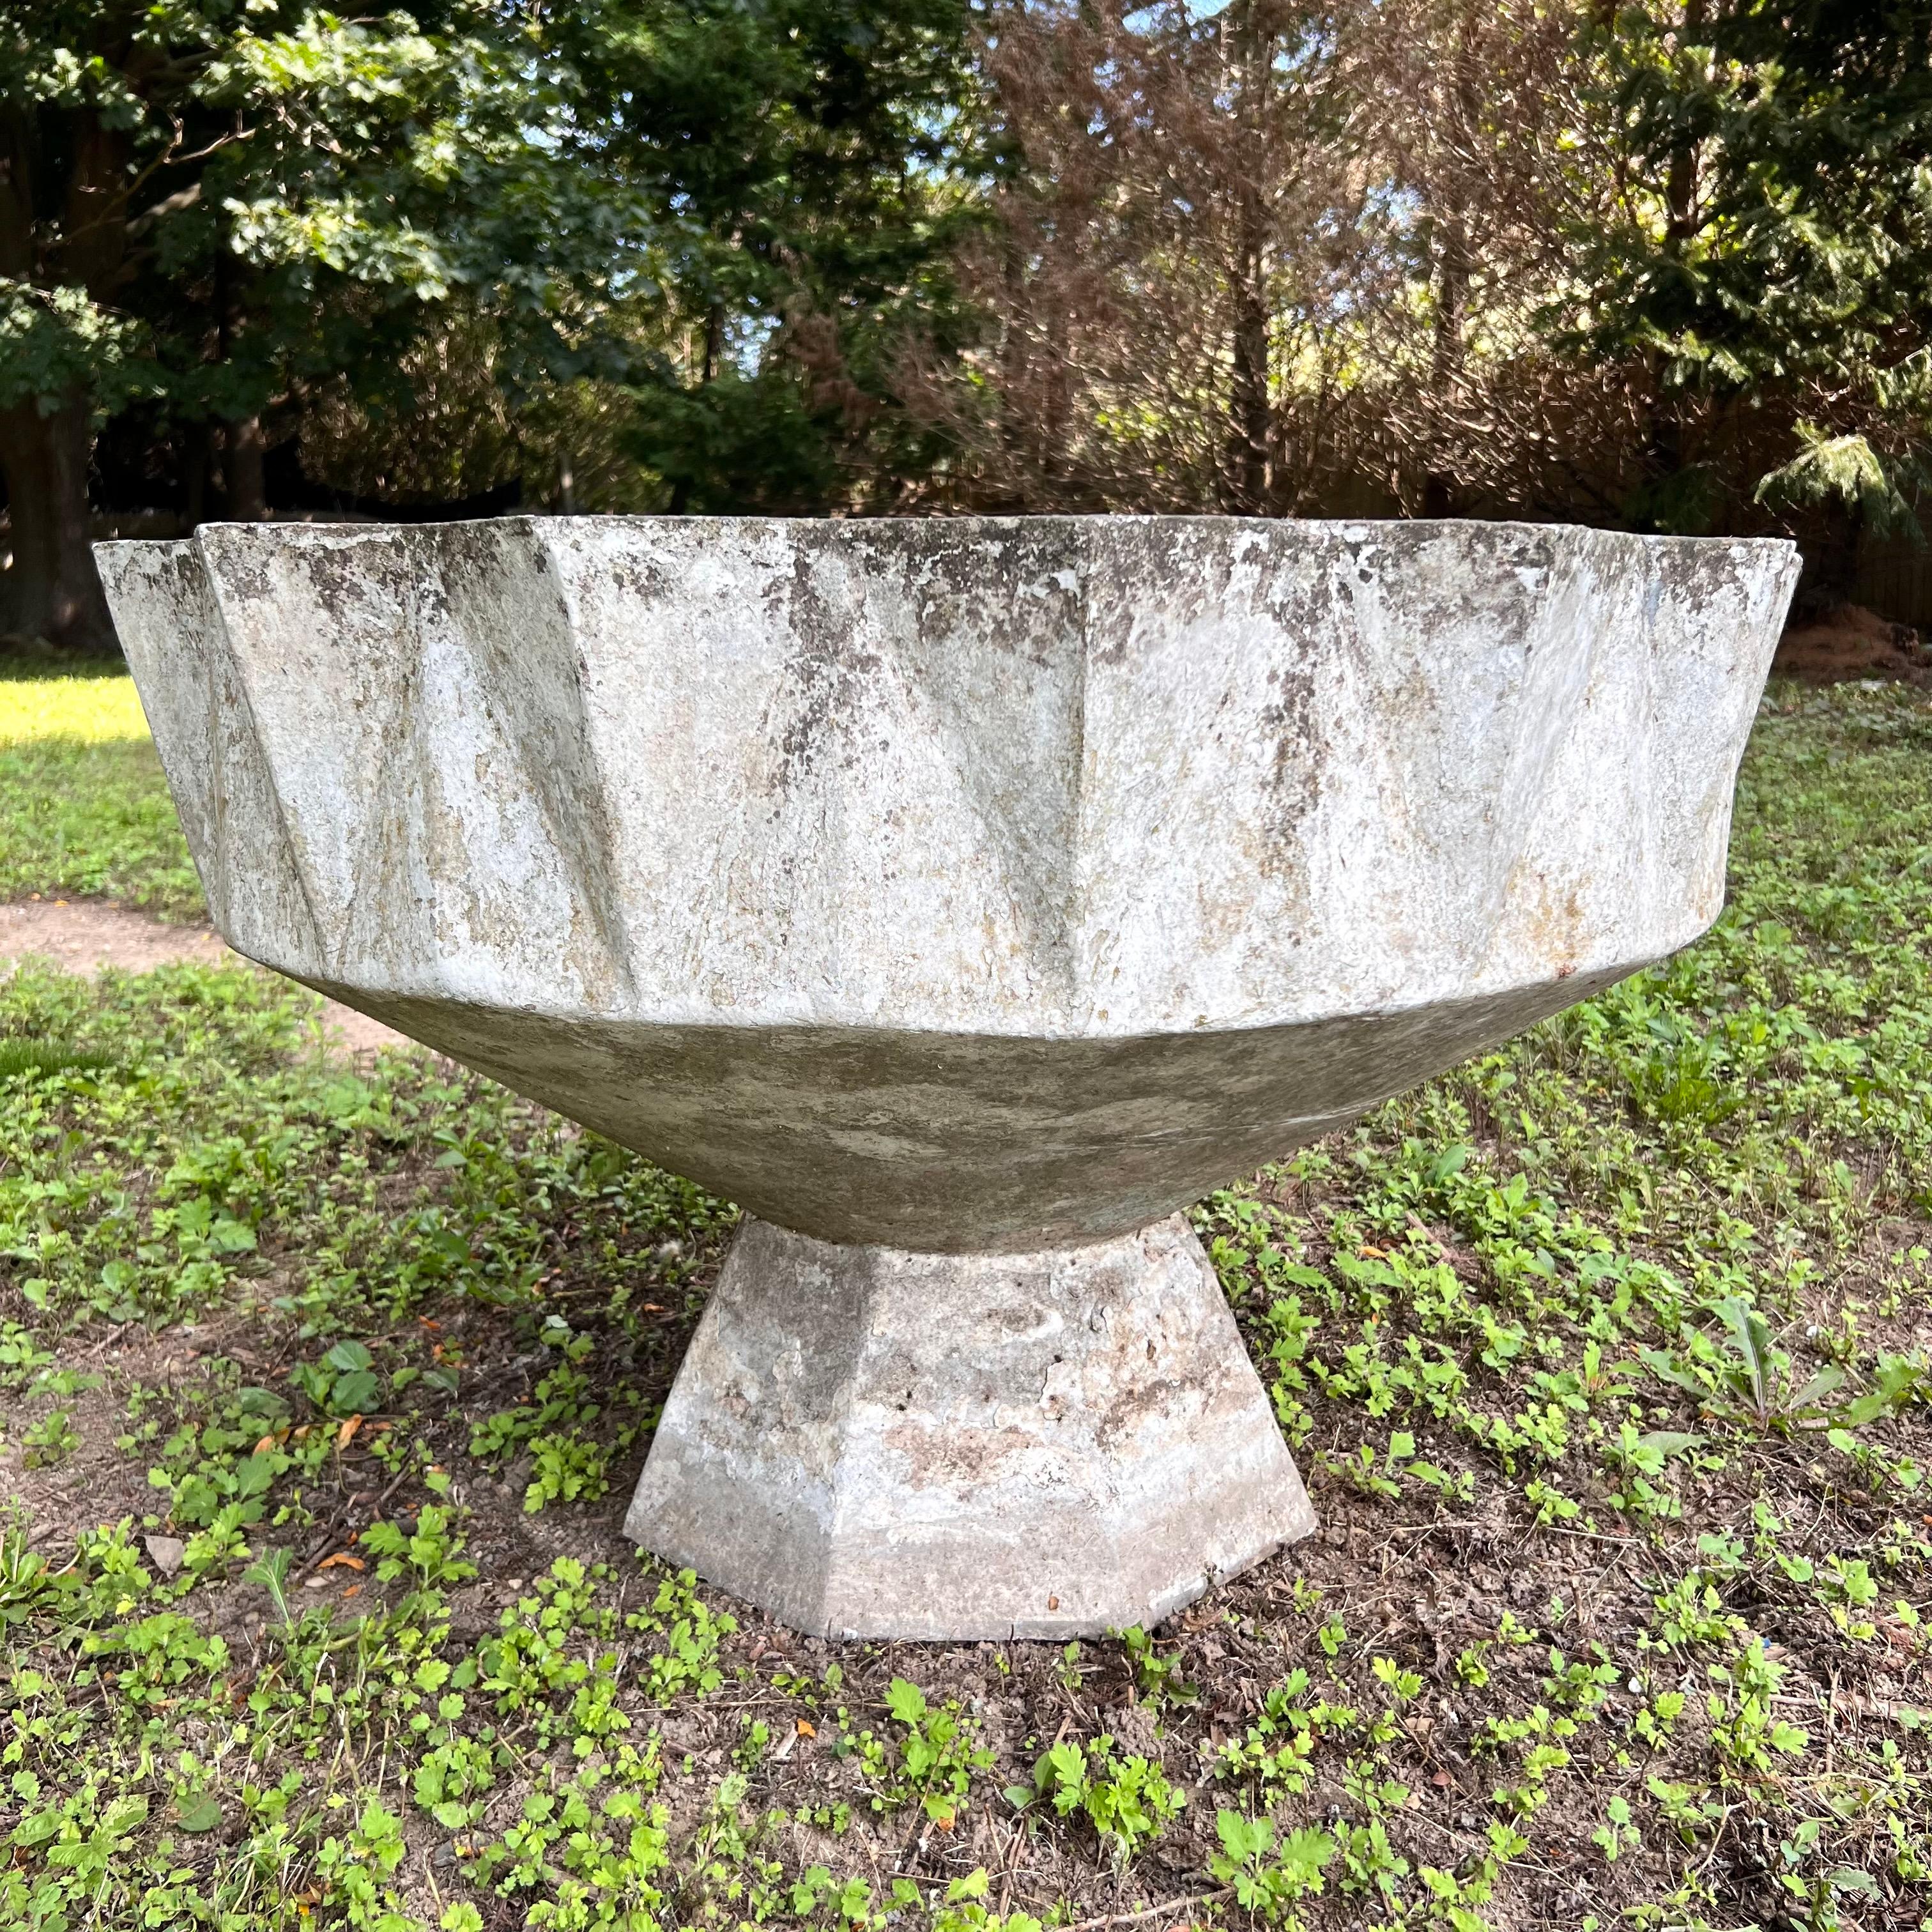 Unique concrete planter by Swiss architect Willy Guhl. Planter in the shape of a chalice with faceted edges along the top and bottom. Great age and patina from decades of European winters. Massive, rare size. Good vintage condition. One other